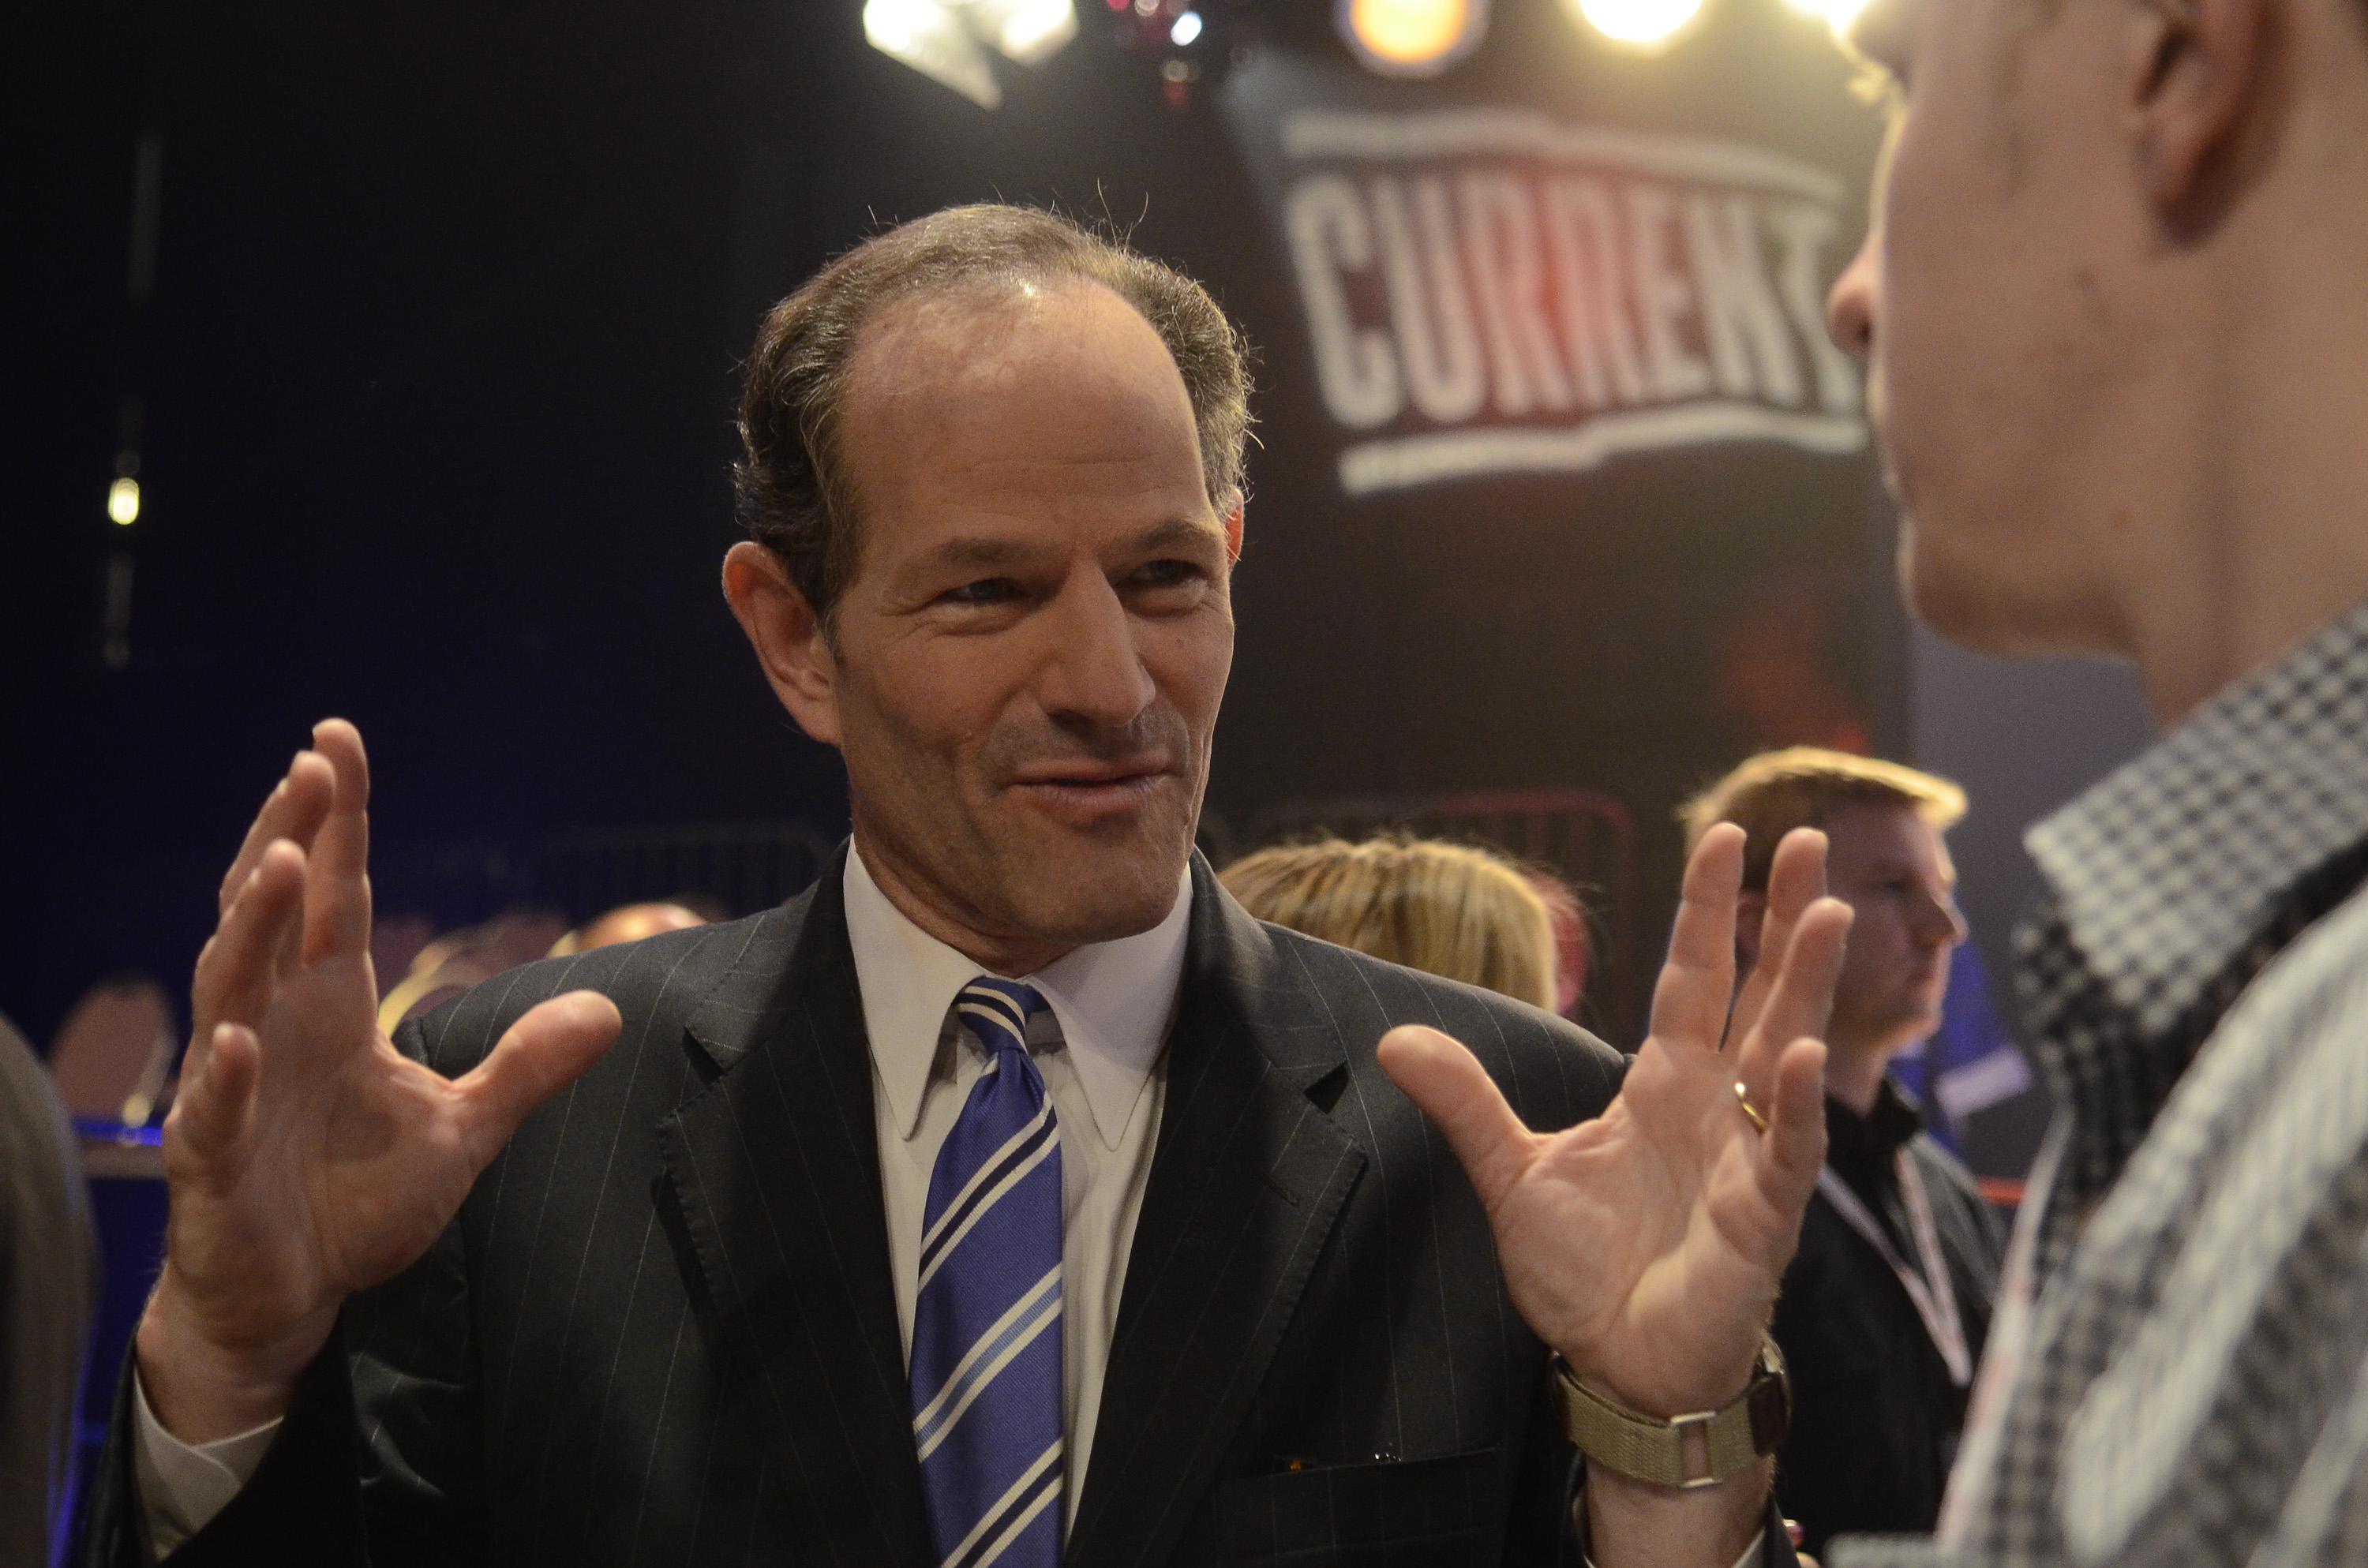 Eliot Spitzer at a 2012 press conference in New York.